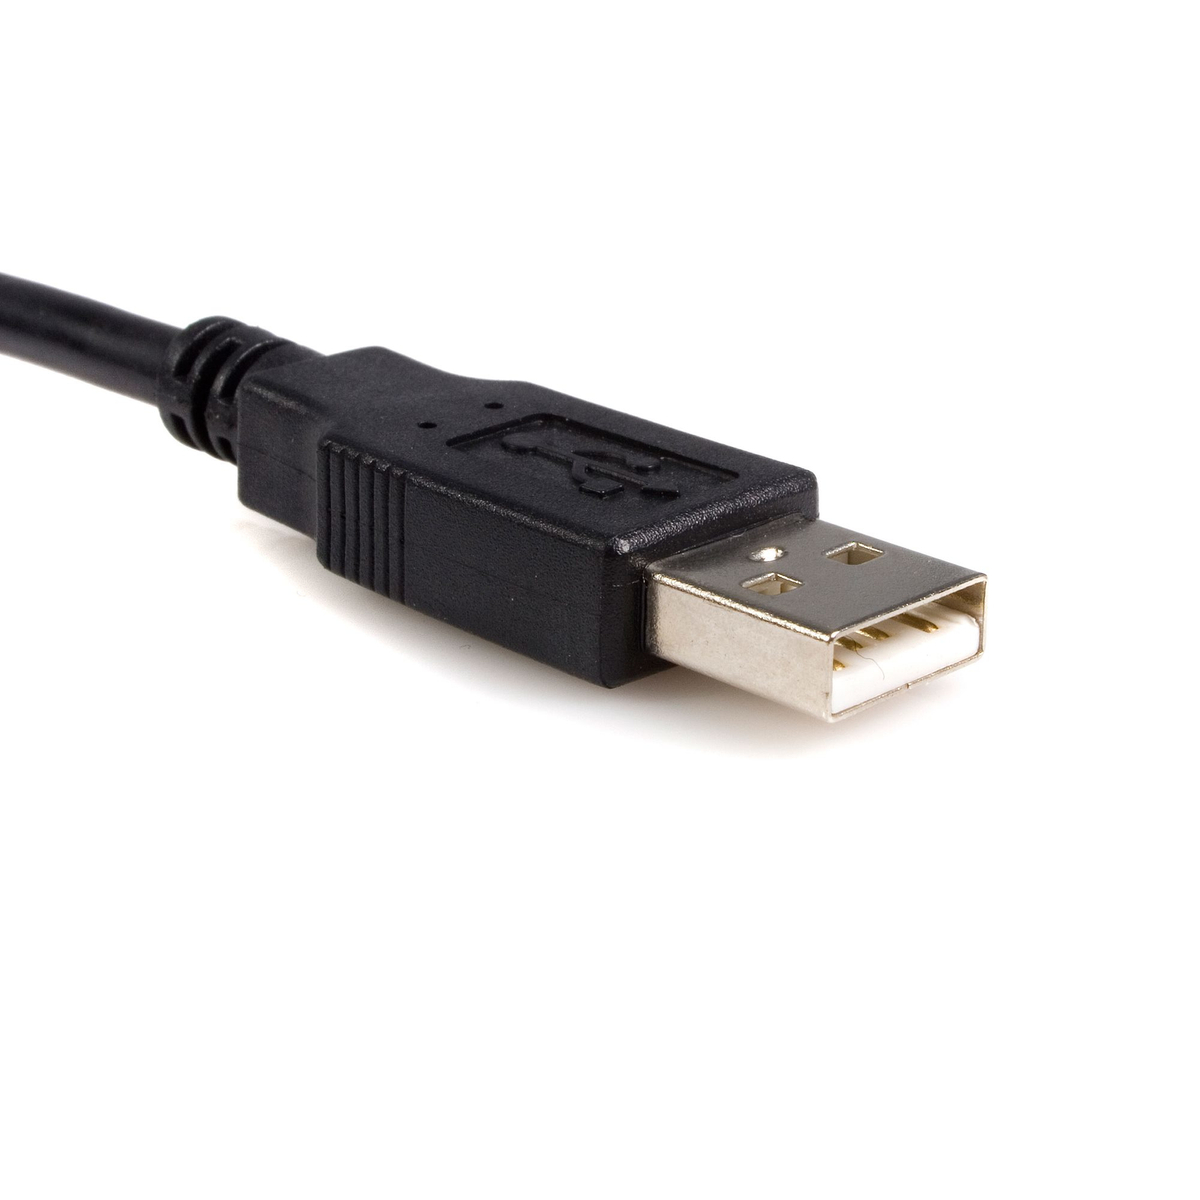 6 ft USB to Parallel Printer Adapter